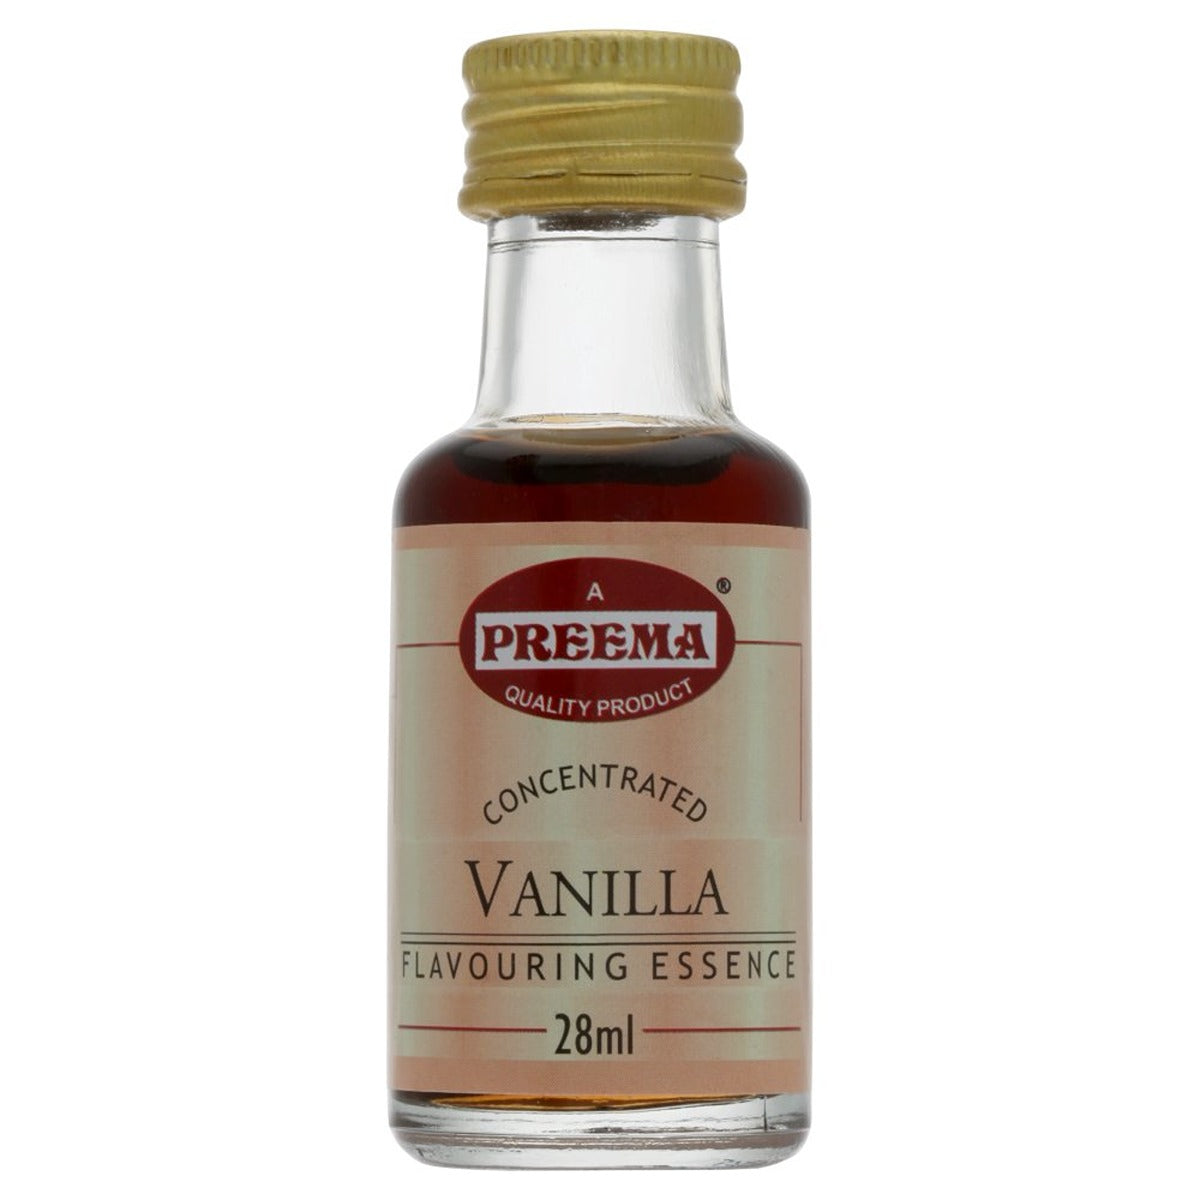 Preema - Vanilla Flavouring Essence - 28ml is the brand and product name of the concentrated vanilla flavouring essence.